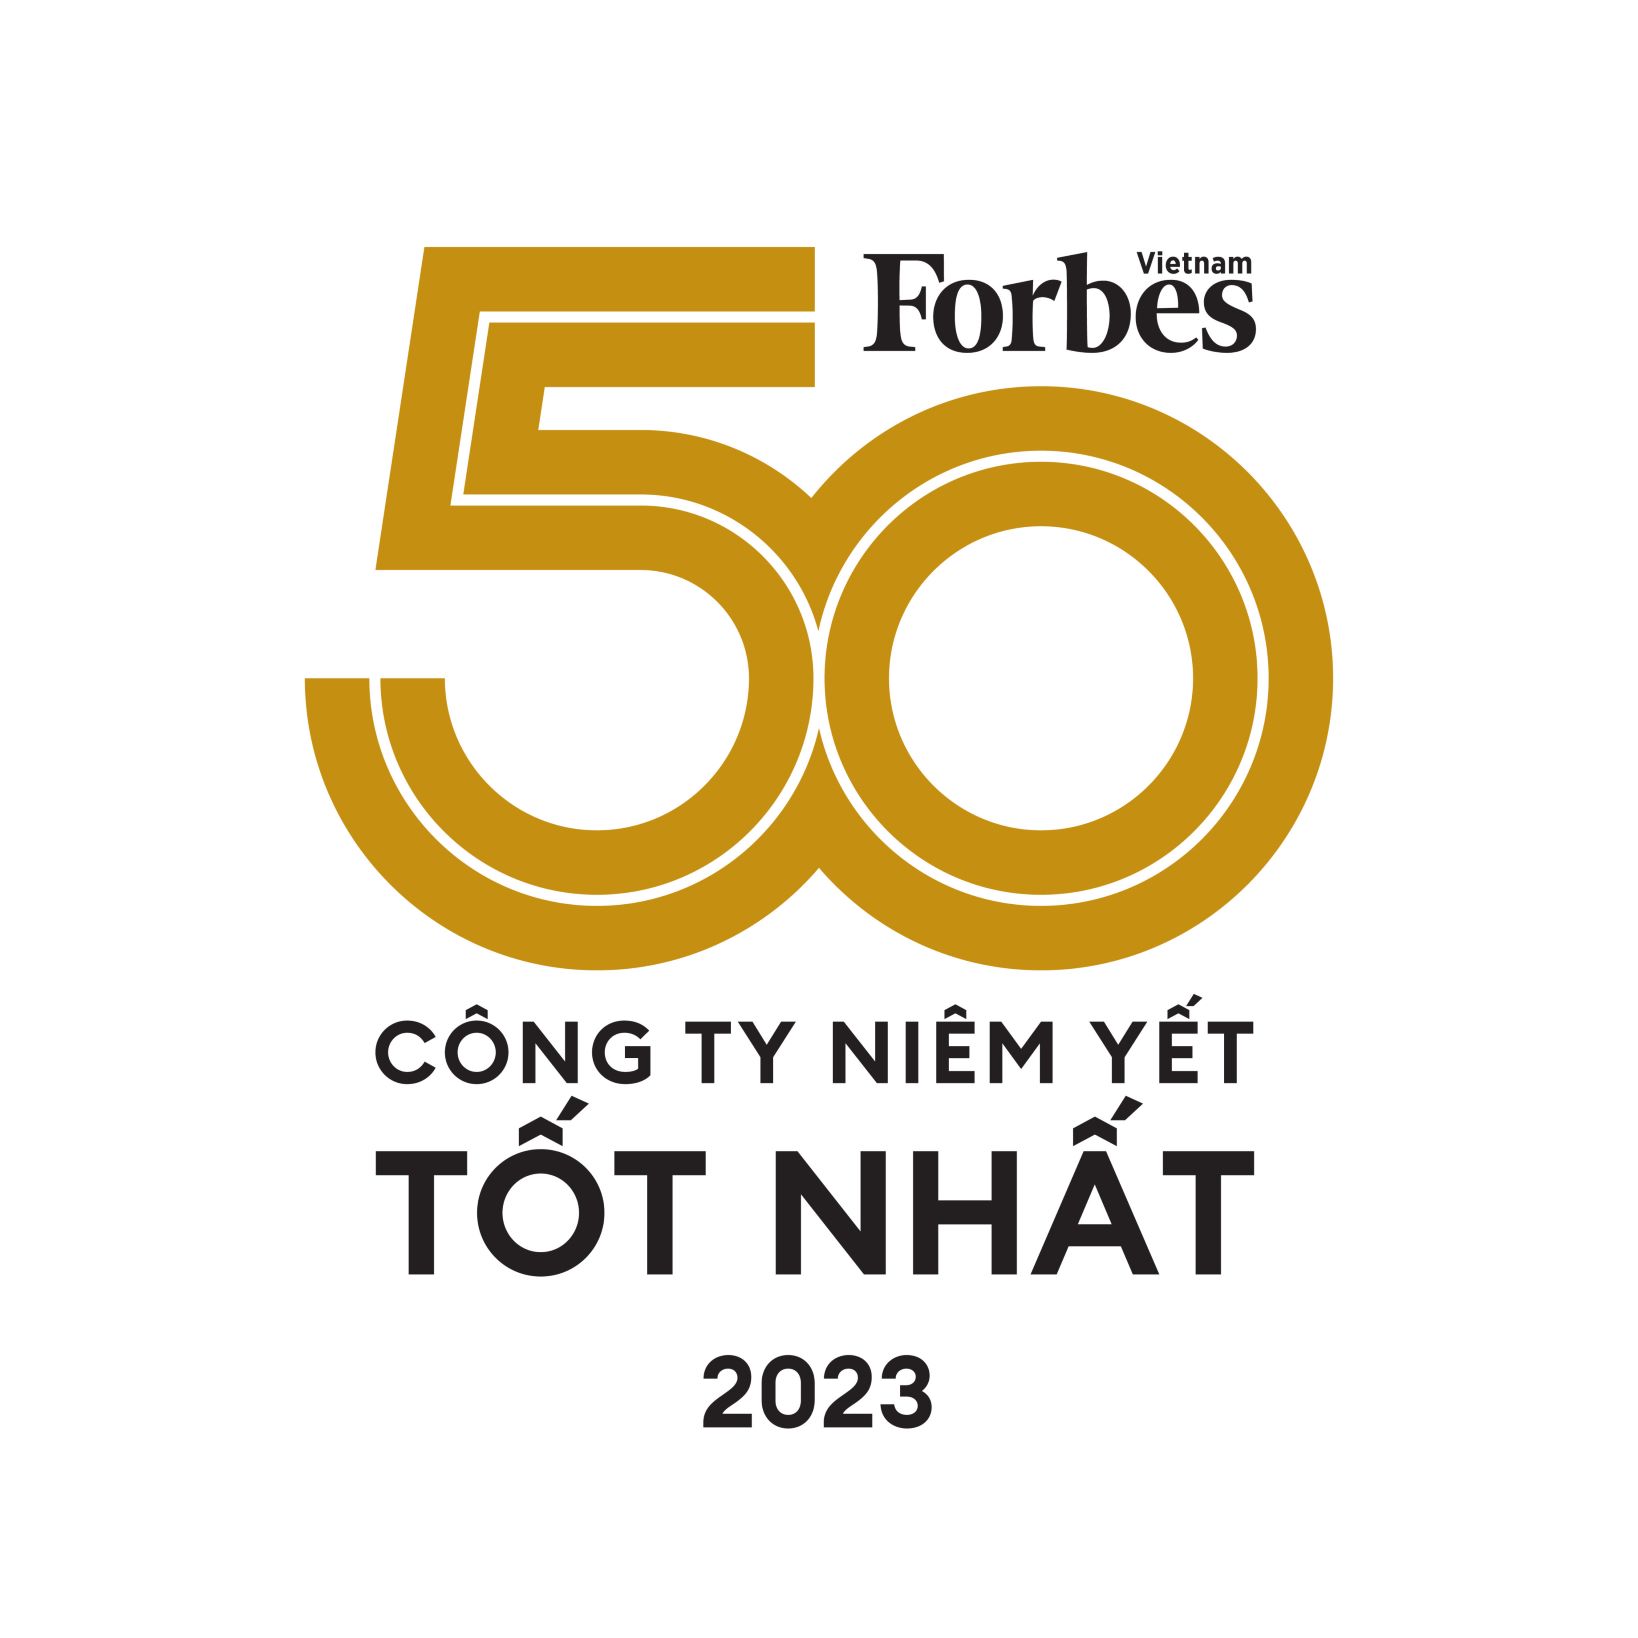 Top 50 best listed companies in Vietnam 2023